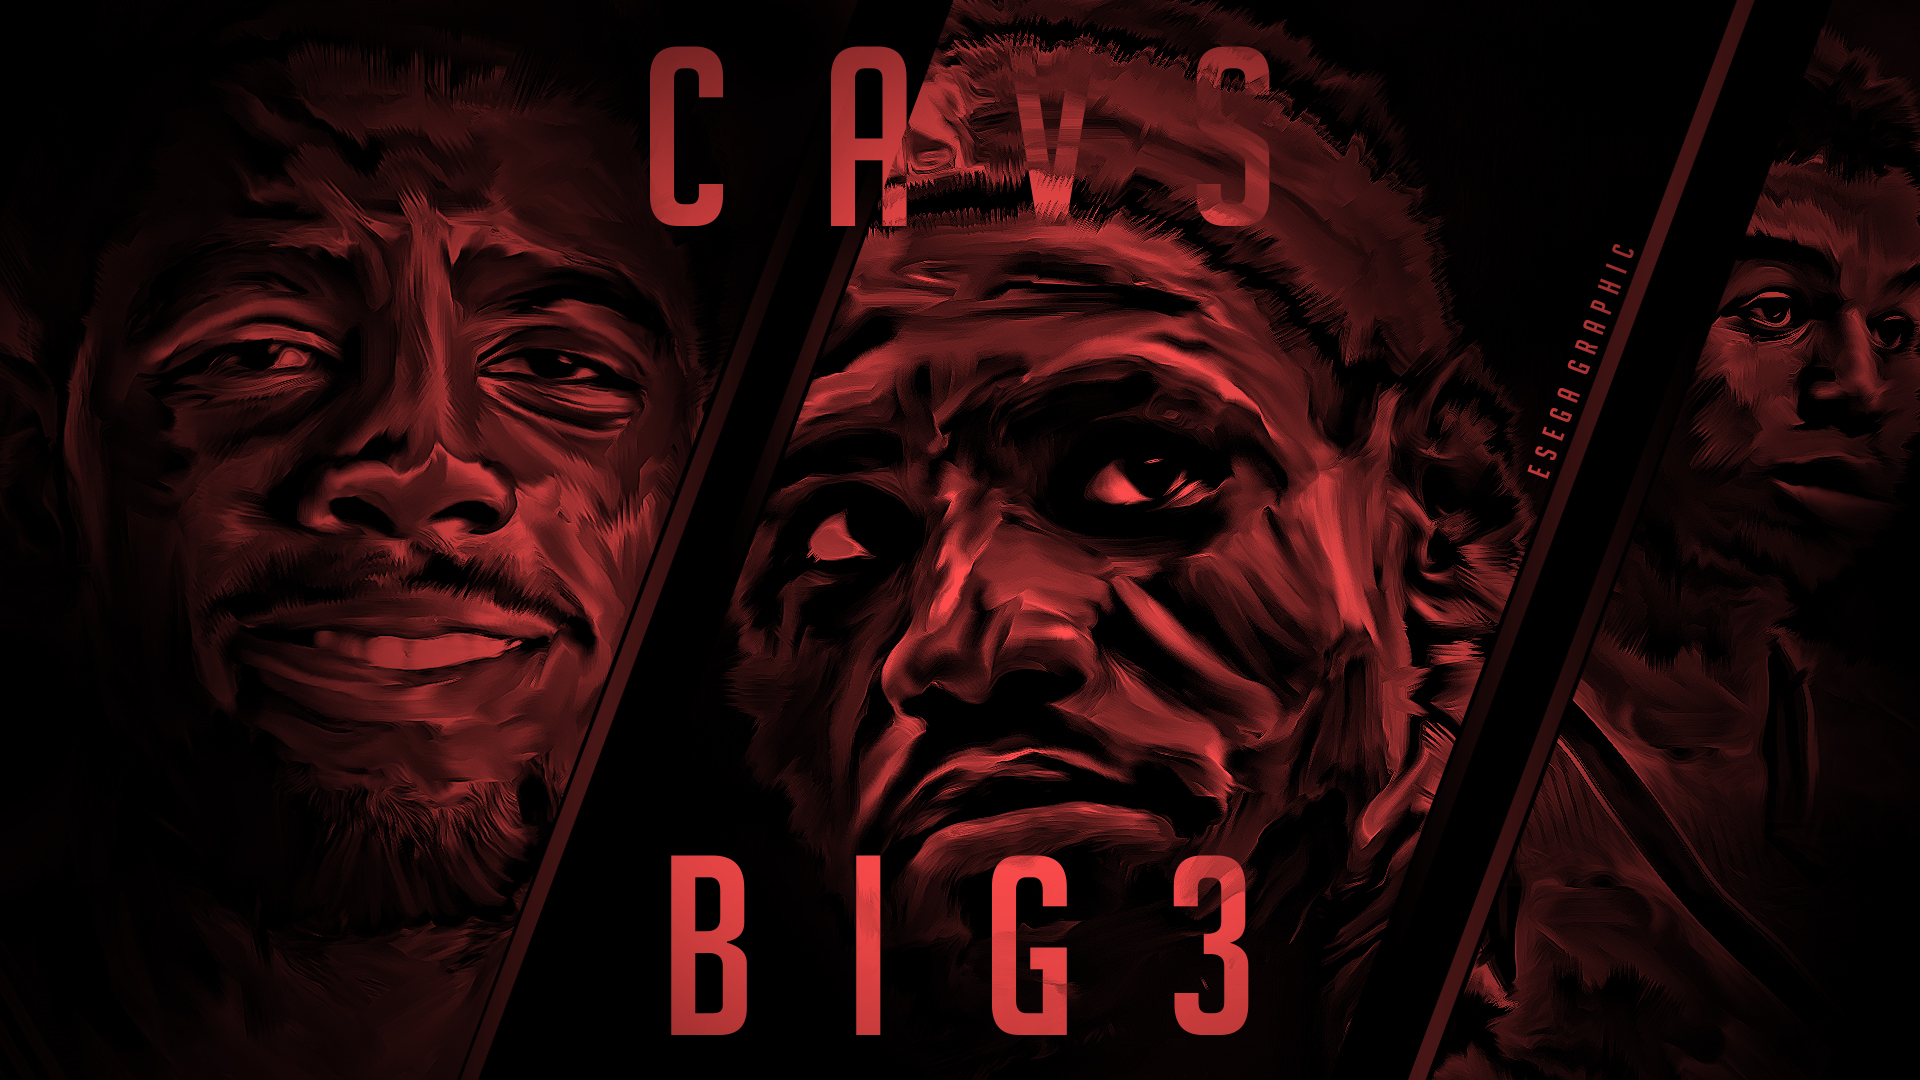 Cleveland Cavs Big3 Digital Painting Wallpaper By Esegagraphic On